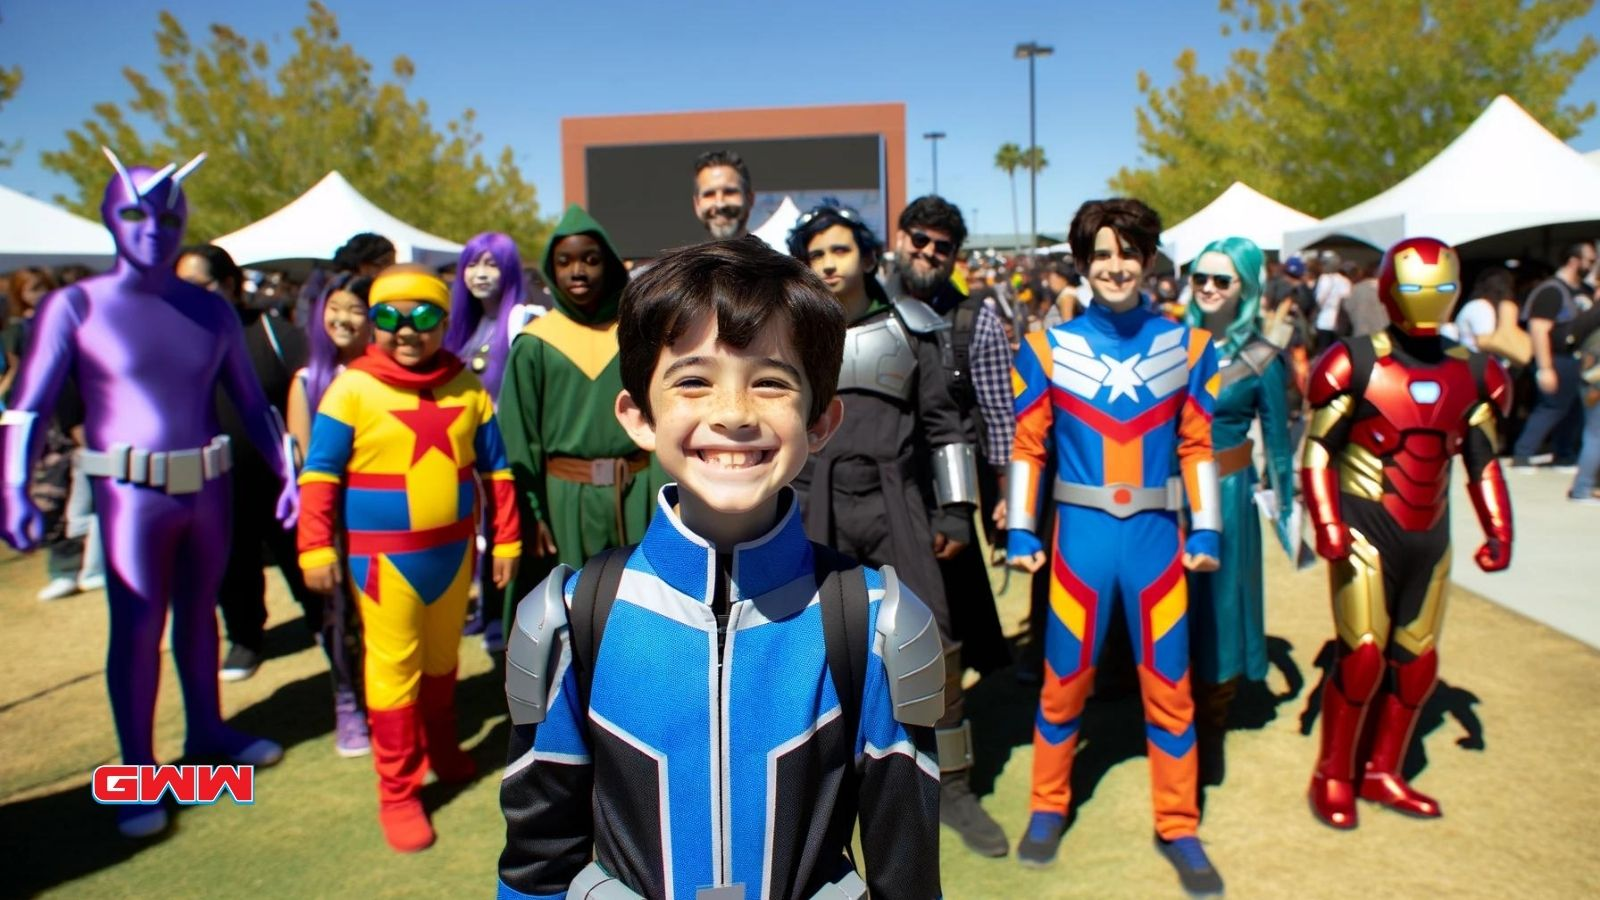 12-year-old in superhero costume at cosplay event with crowd